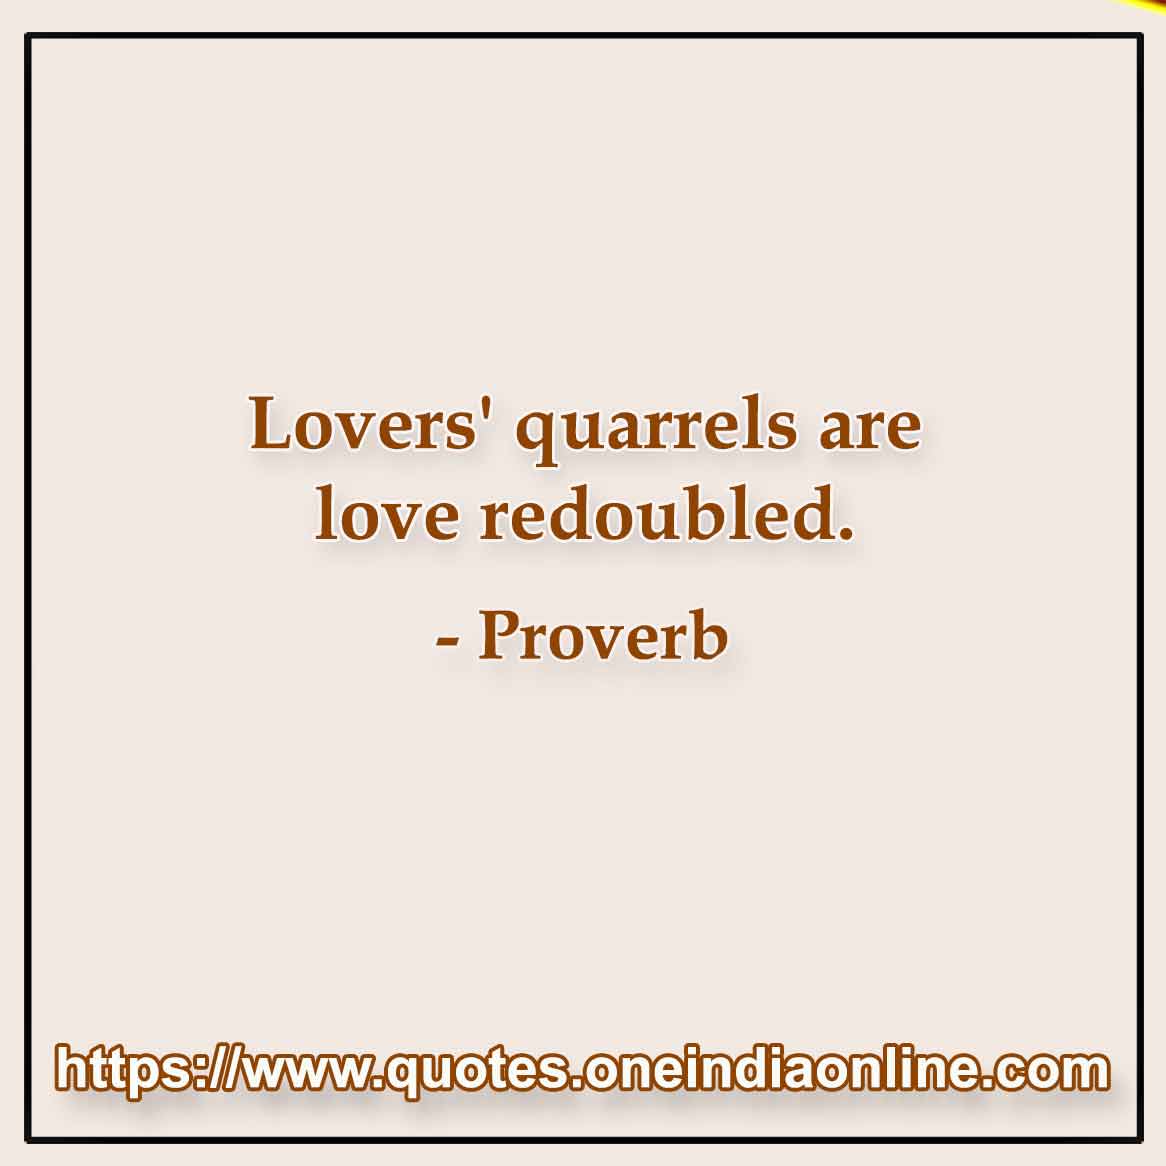 Lovers' quarrels are love redoubled.

Portuguese Proverbs